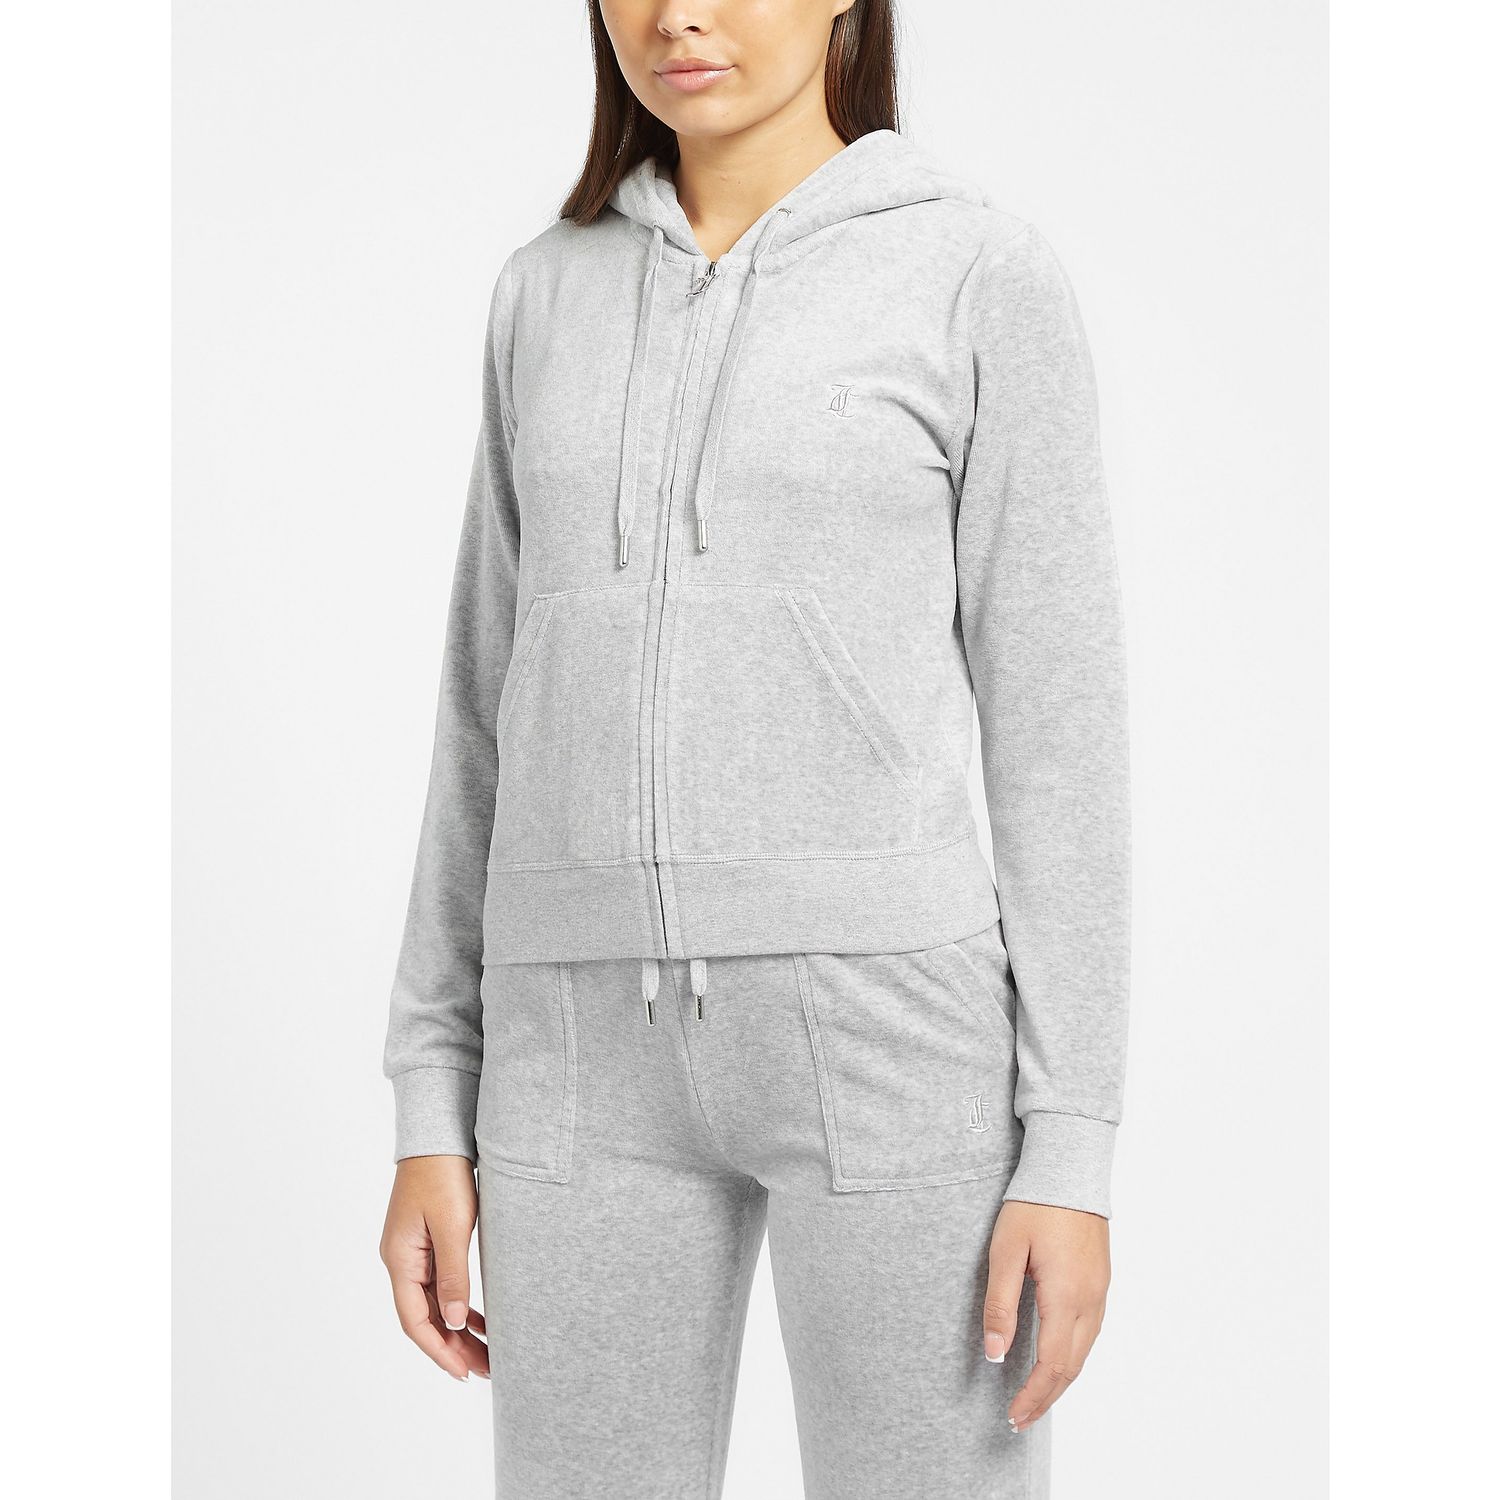 Woman Within Velour Athletic Sweatshirts for Women